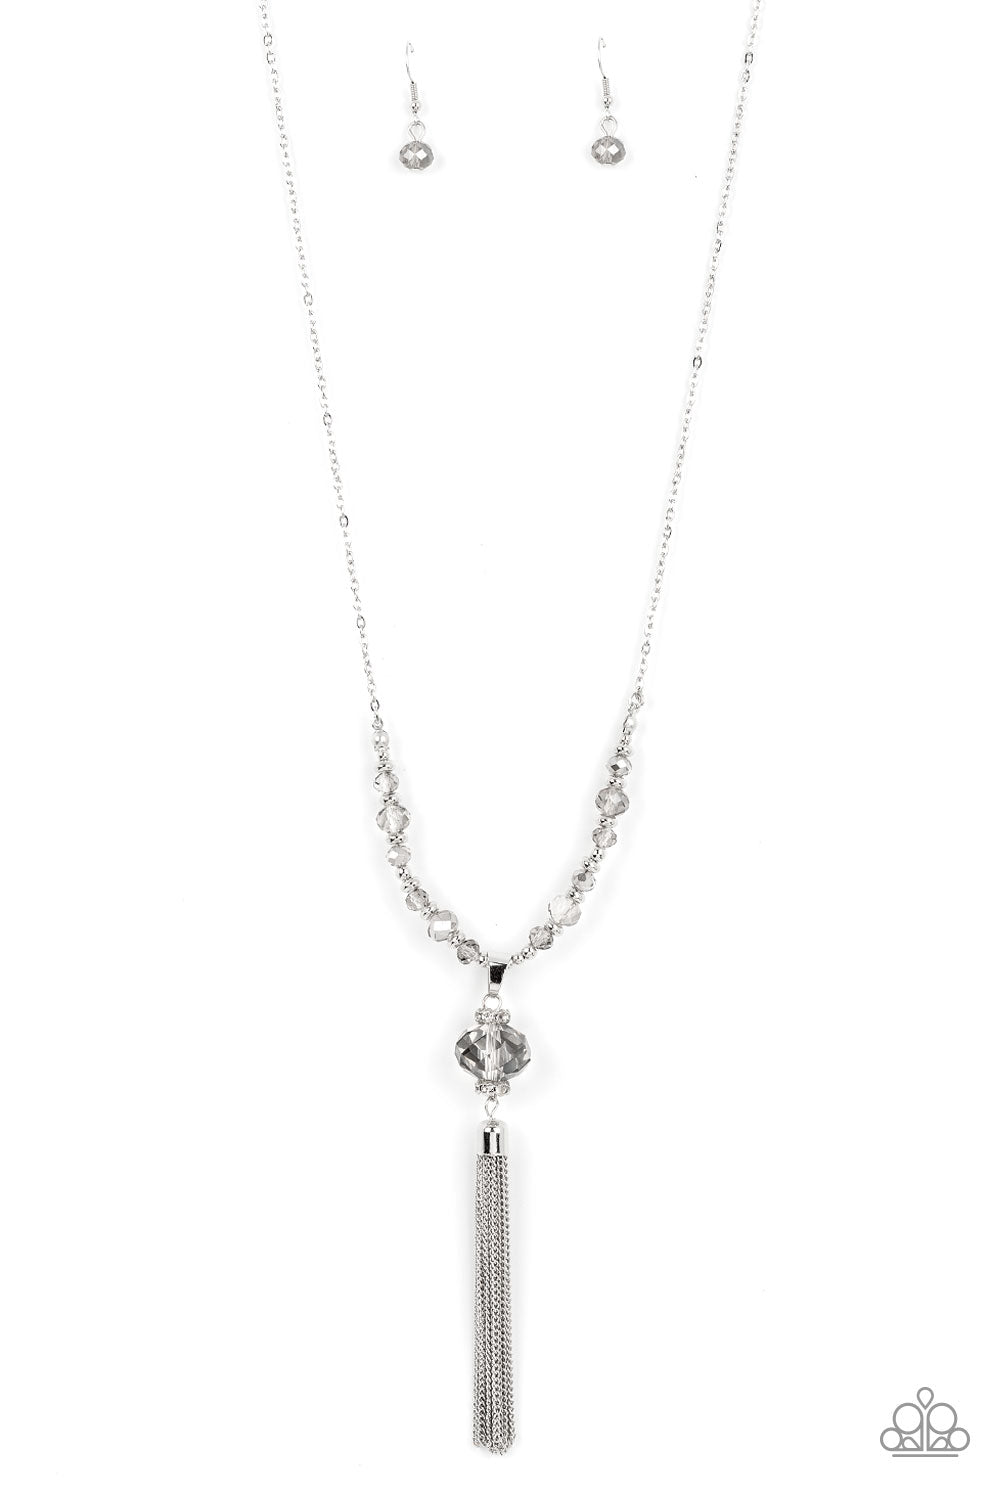 Paparazzi Necklace - One SWAY or Another - Silver